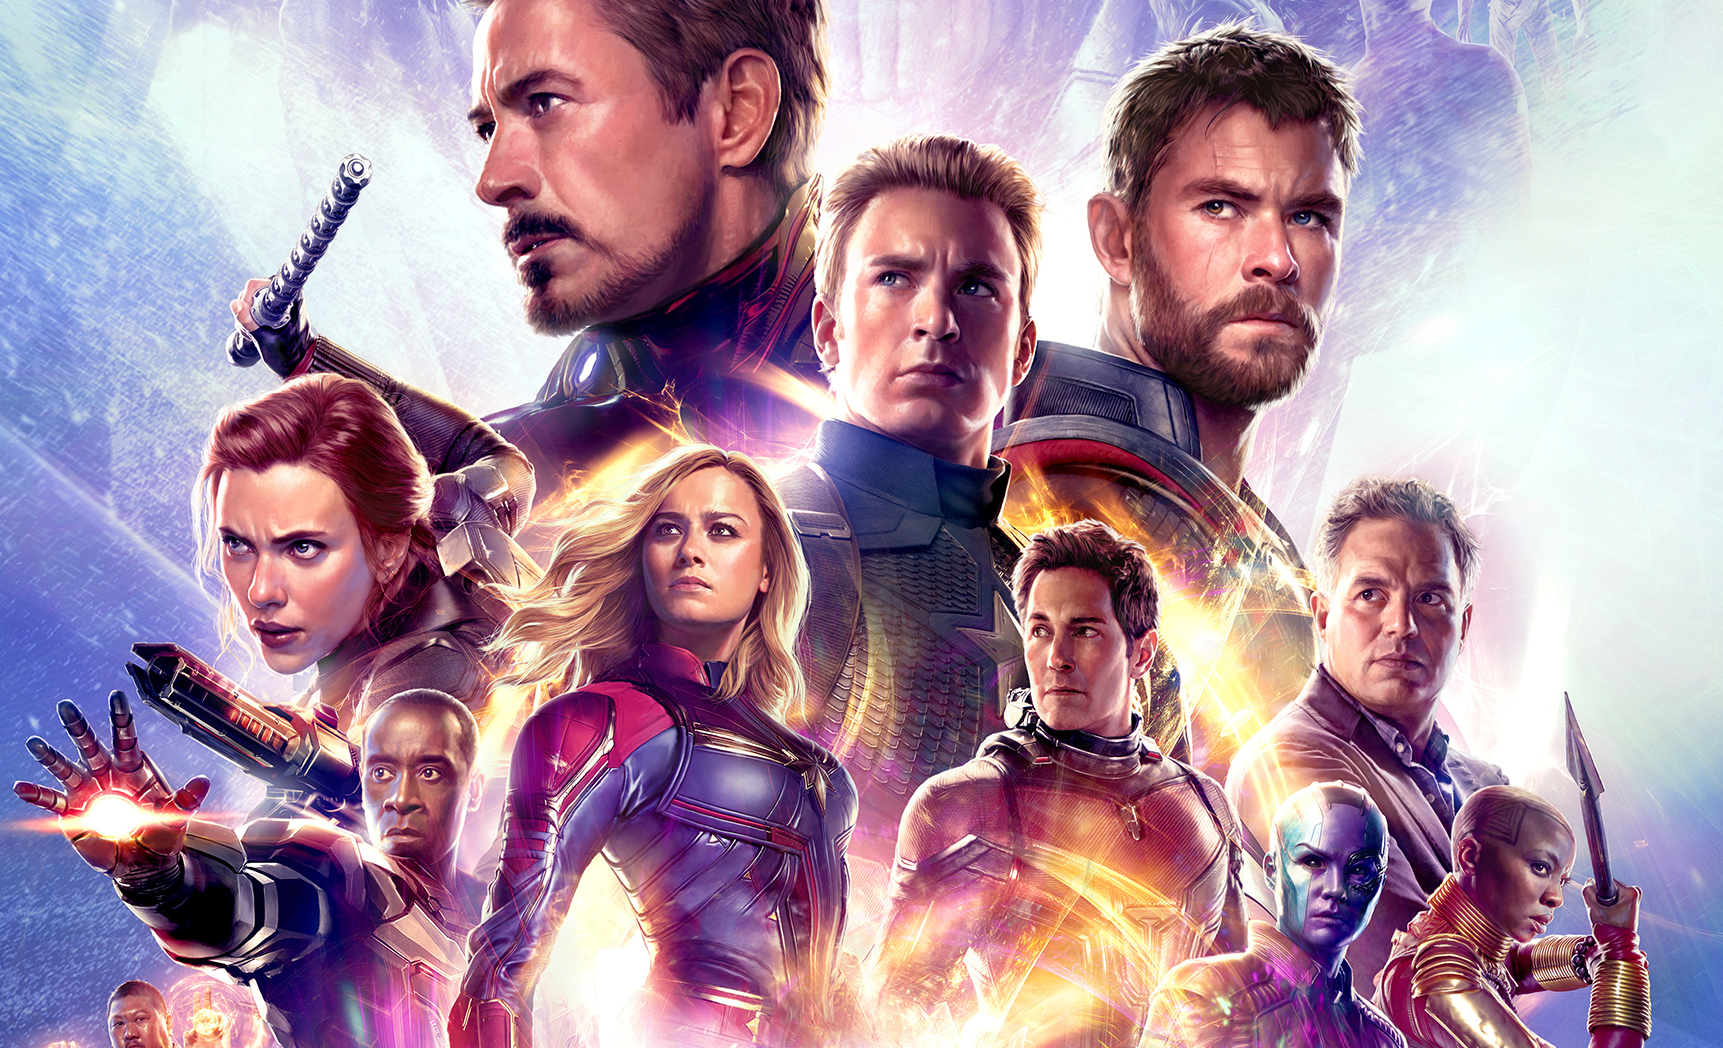 Avengers: Endgame TV spots feature new footage from the Marvel blockbuster